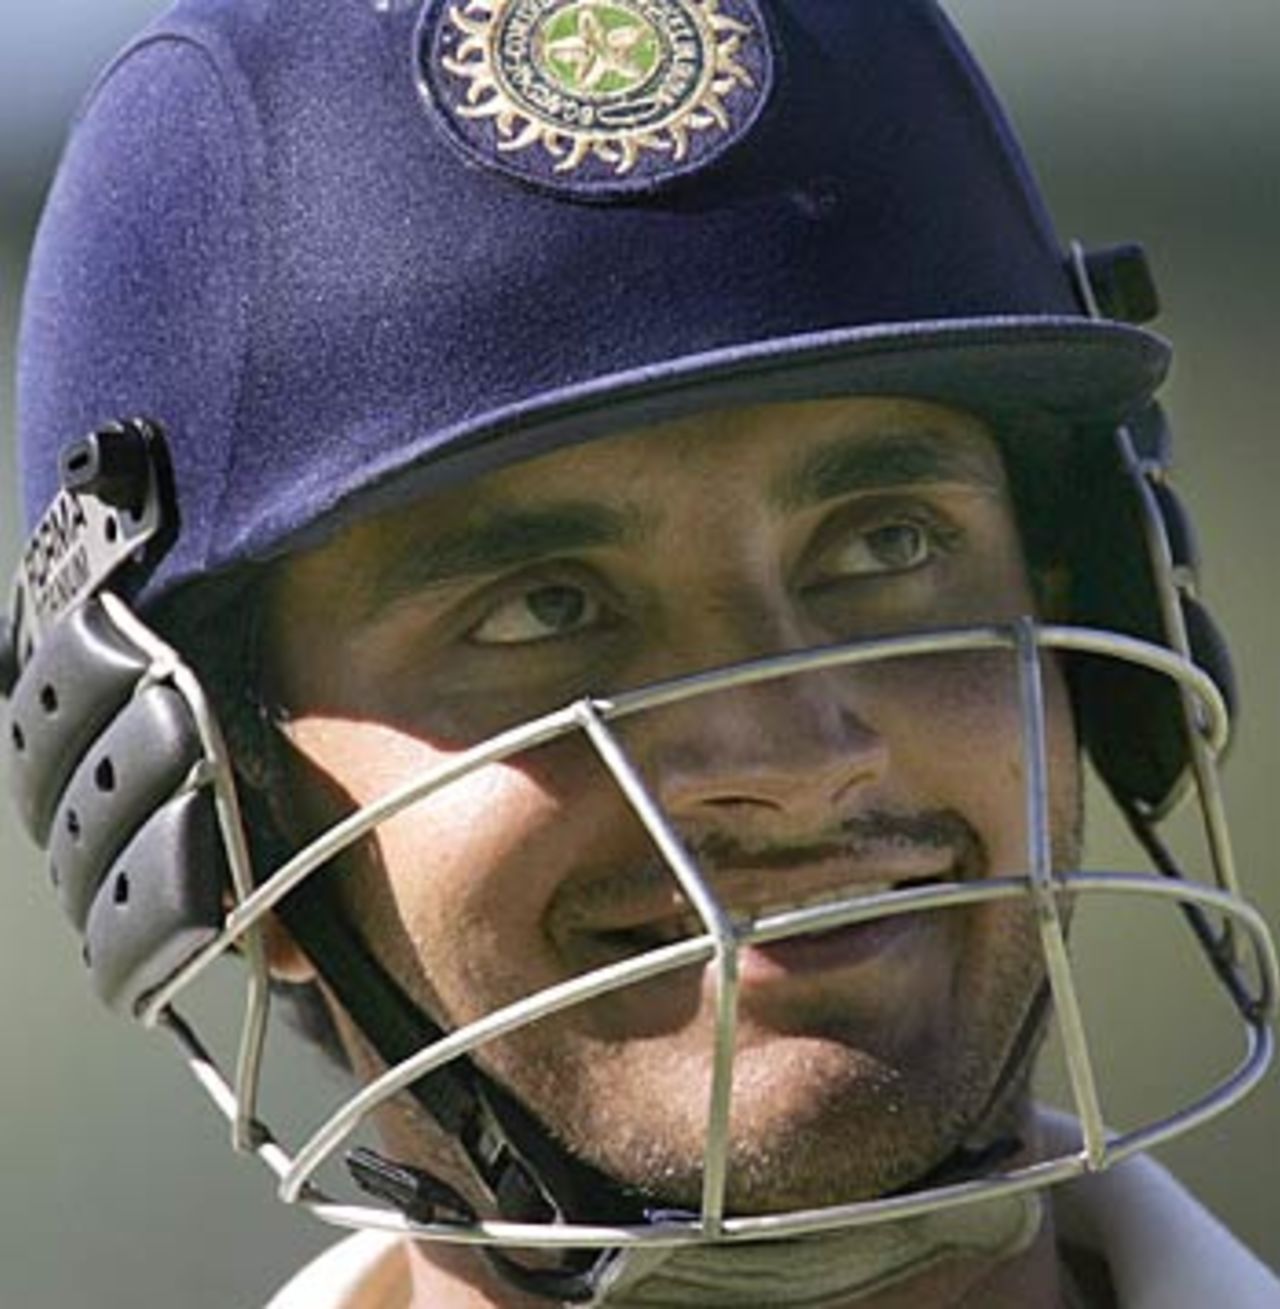 Sourav Ganguly allows himself a smile after completing his century, Zimbabwe v India, 1st Test, Bulawayo, September 15, 2005